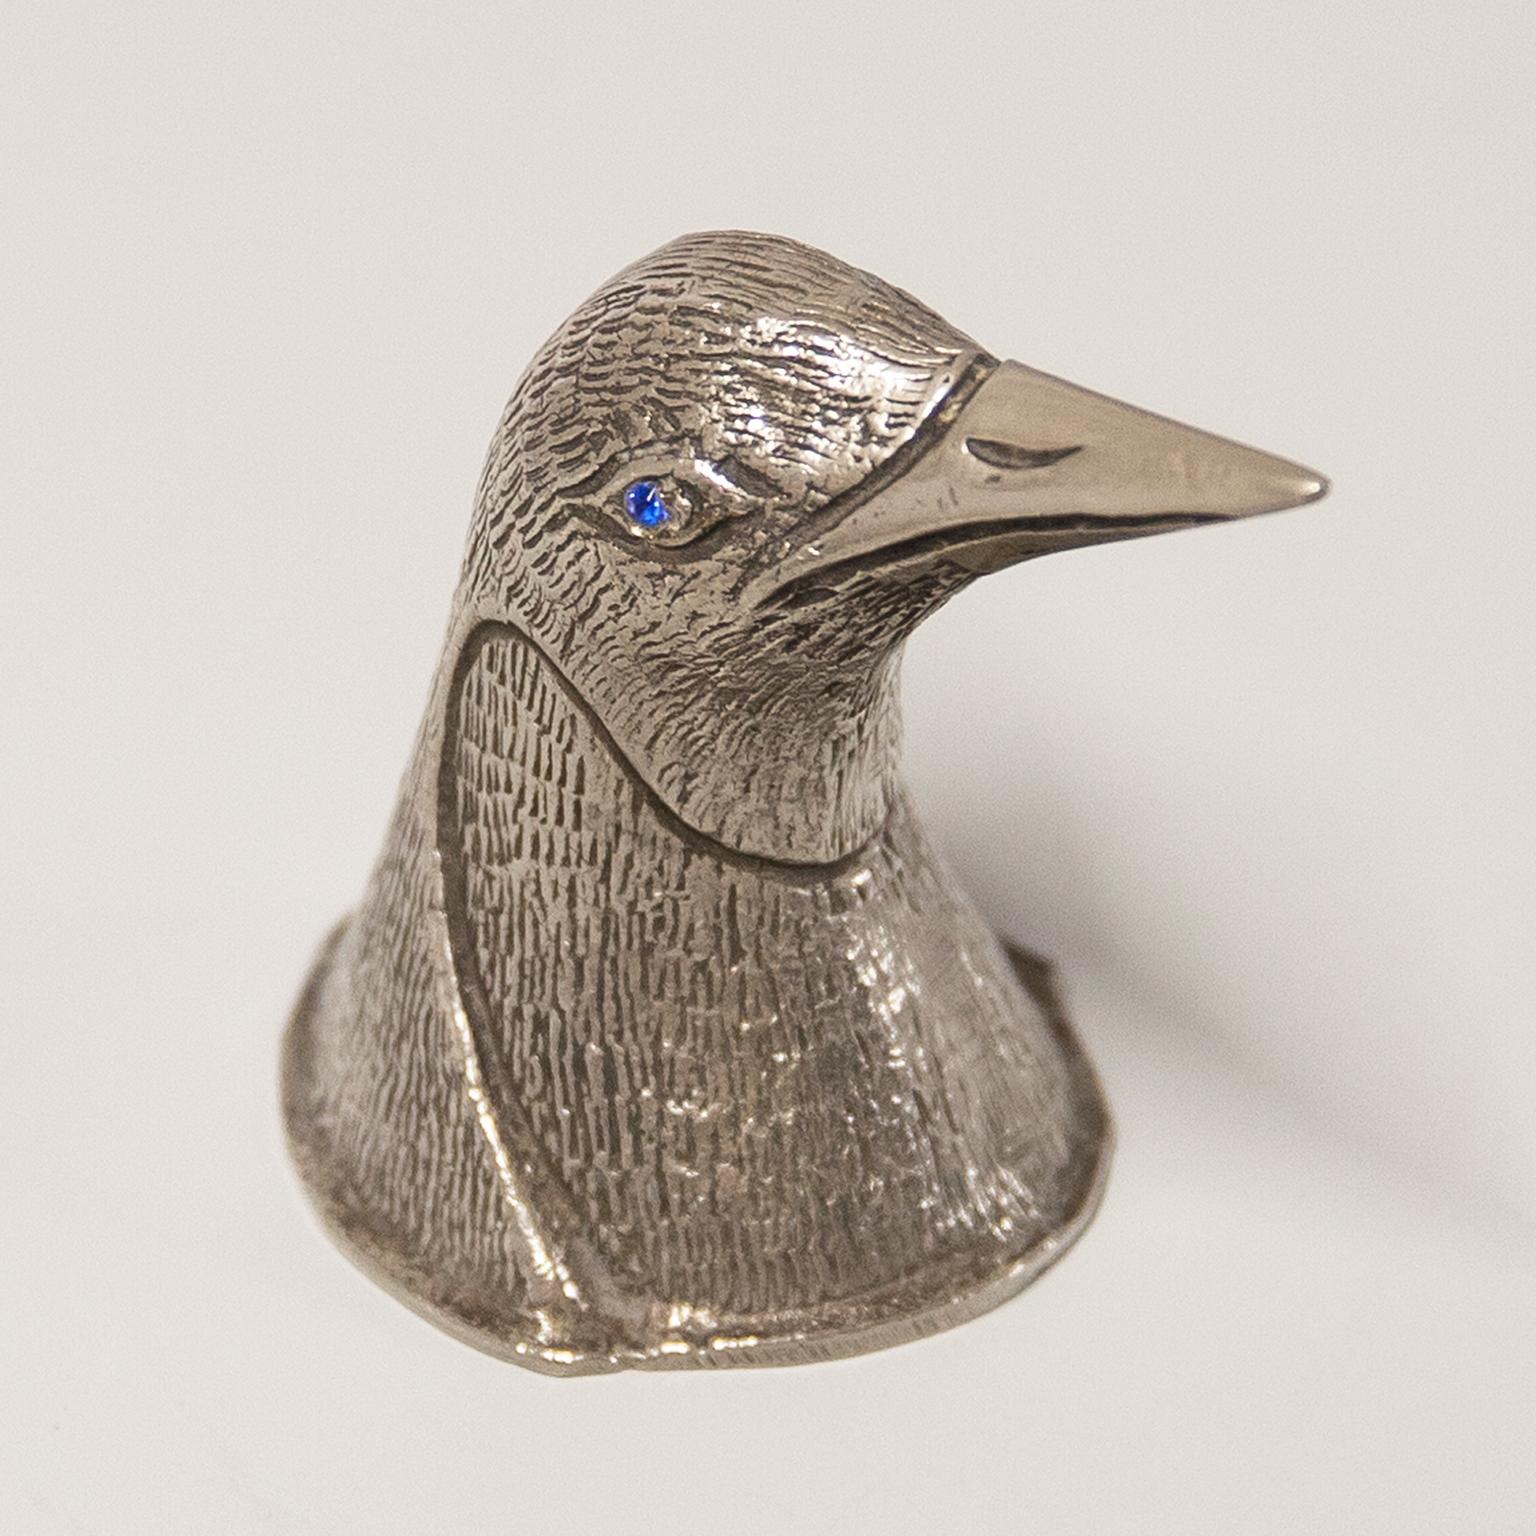 Christofle Selection silver plated bottle opener modelled as a penguin with blue glass sapphire eyes.